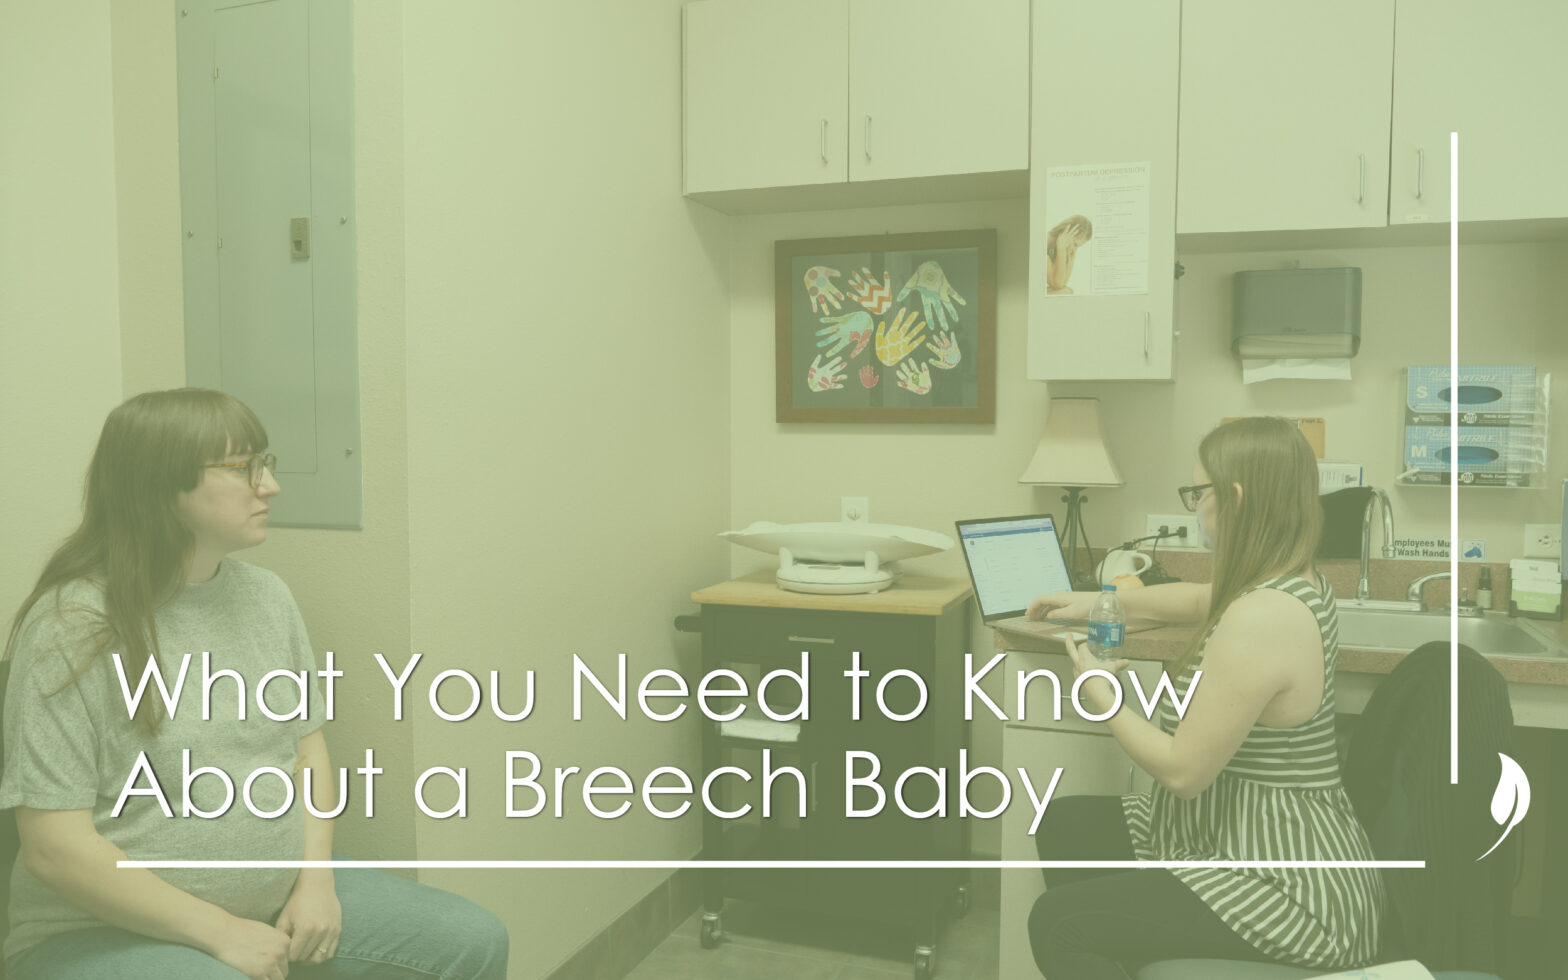 What You Need to Know About a Breech Baby